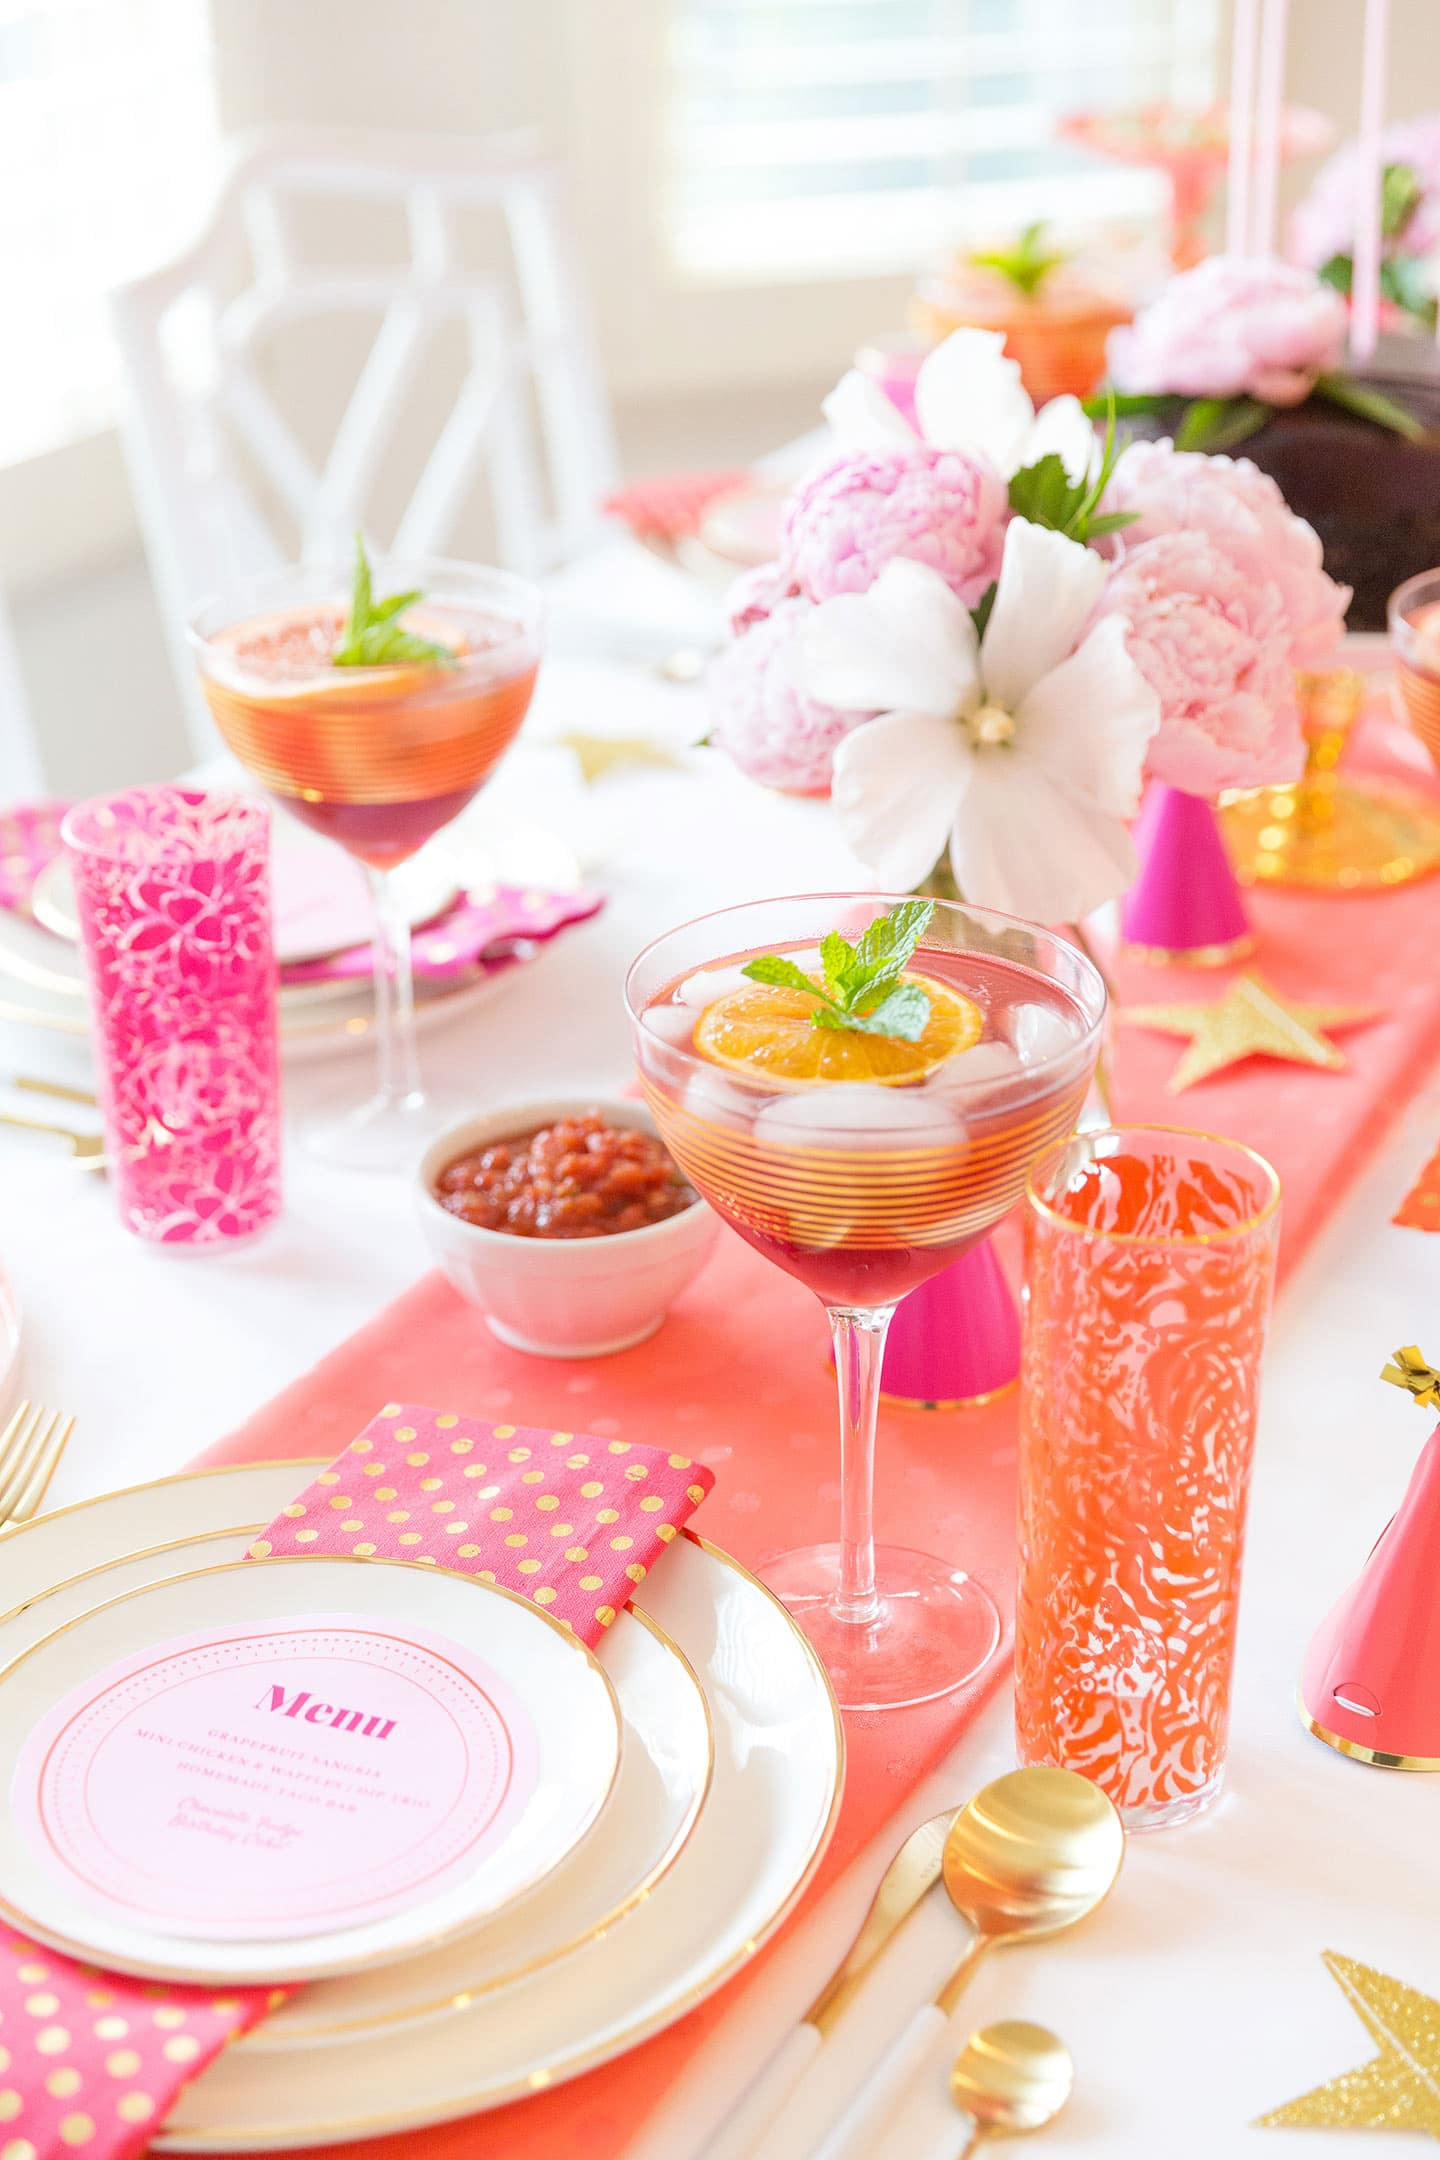 Birthday Party Decorations Ideas For Adults
 Creative Adult Birthday Party Ideas for the Girls